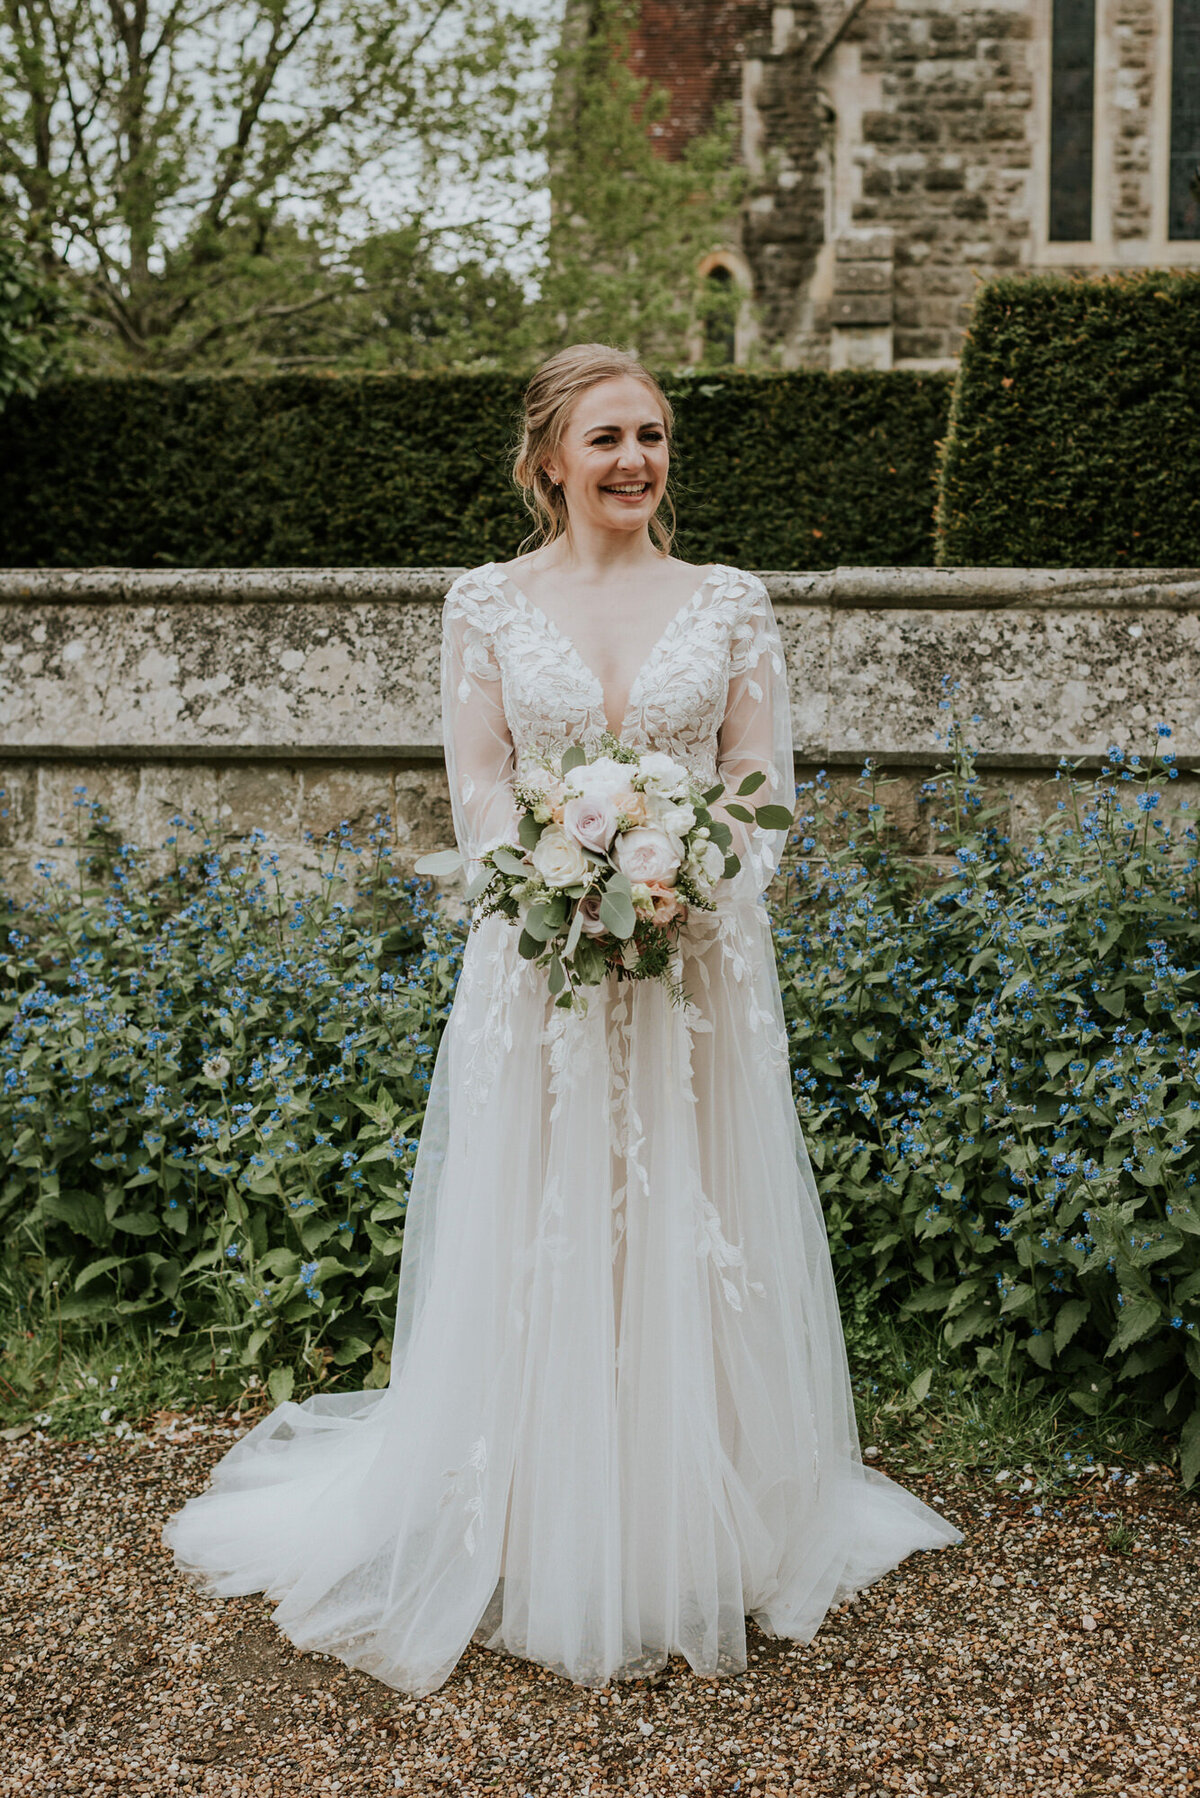 Bride standing outside church in front of blue flowers